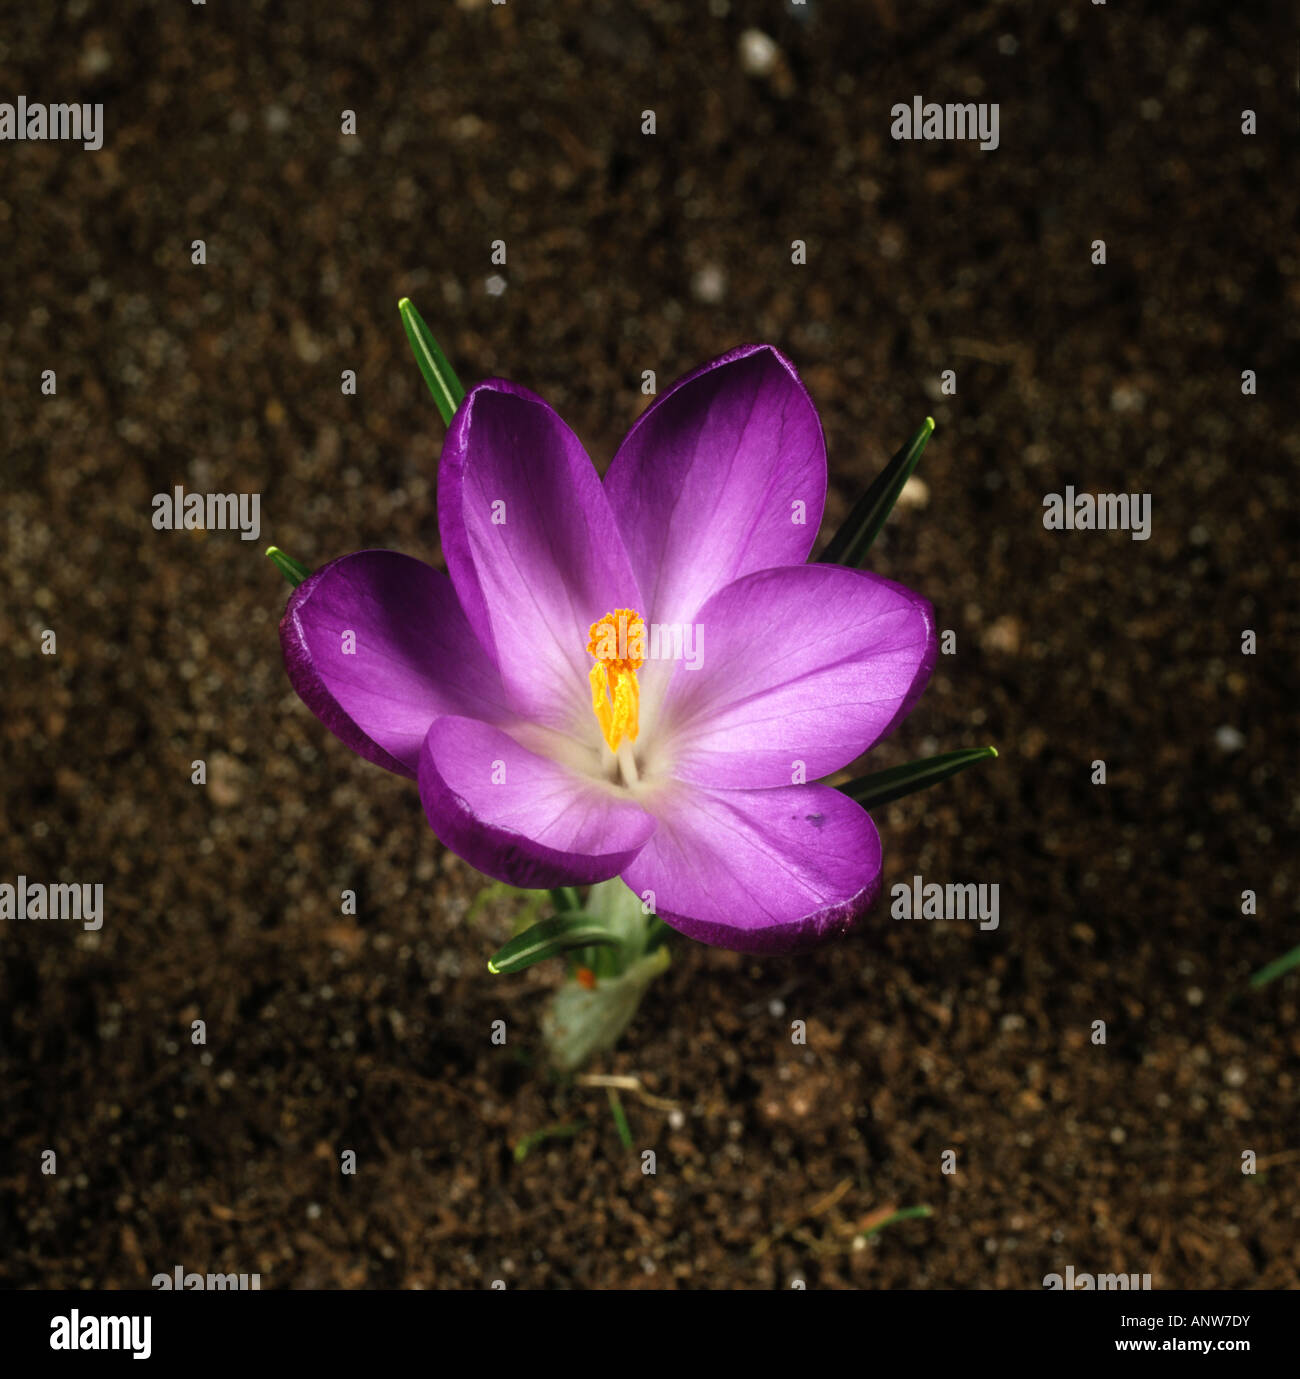 Fourth in a series of photographs showing the opening of a crocus flower Stock Photo